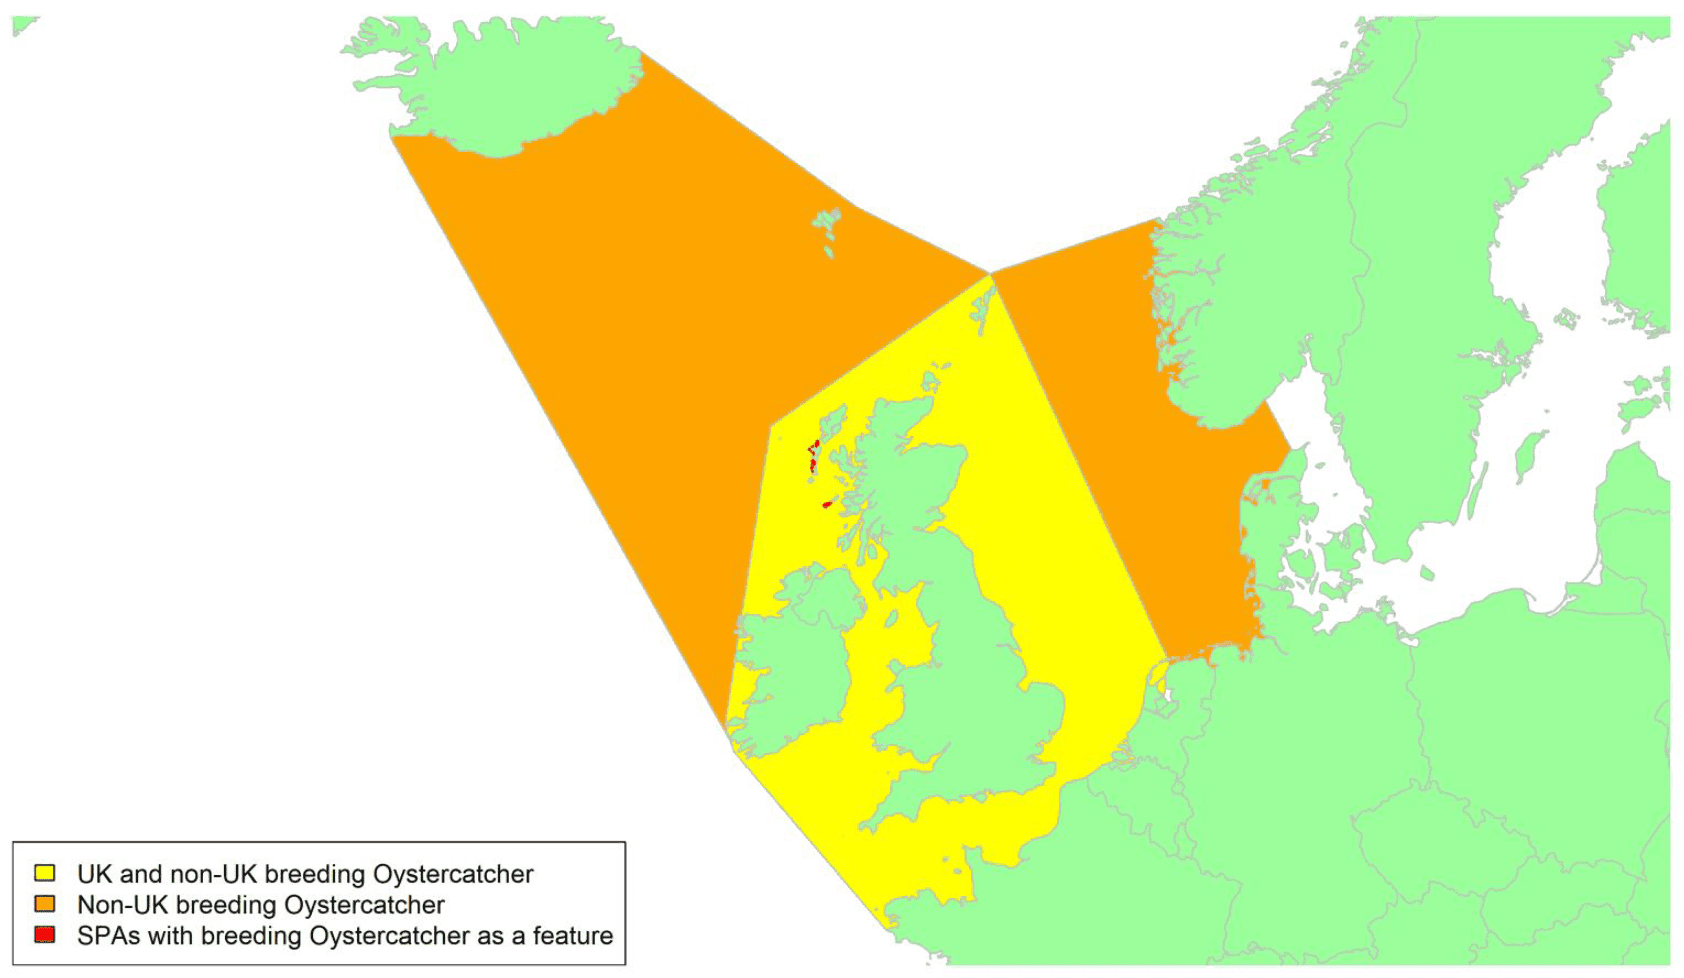 Map of North West Europe showing migratory routes and SPAs within the UK for breeding Oystercatcher as described in the text below.